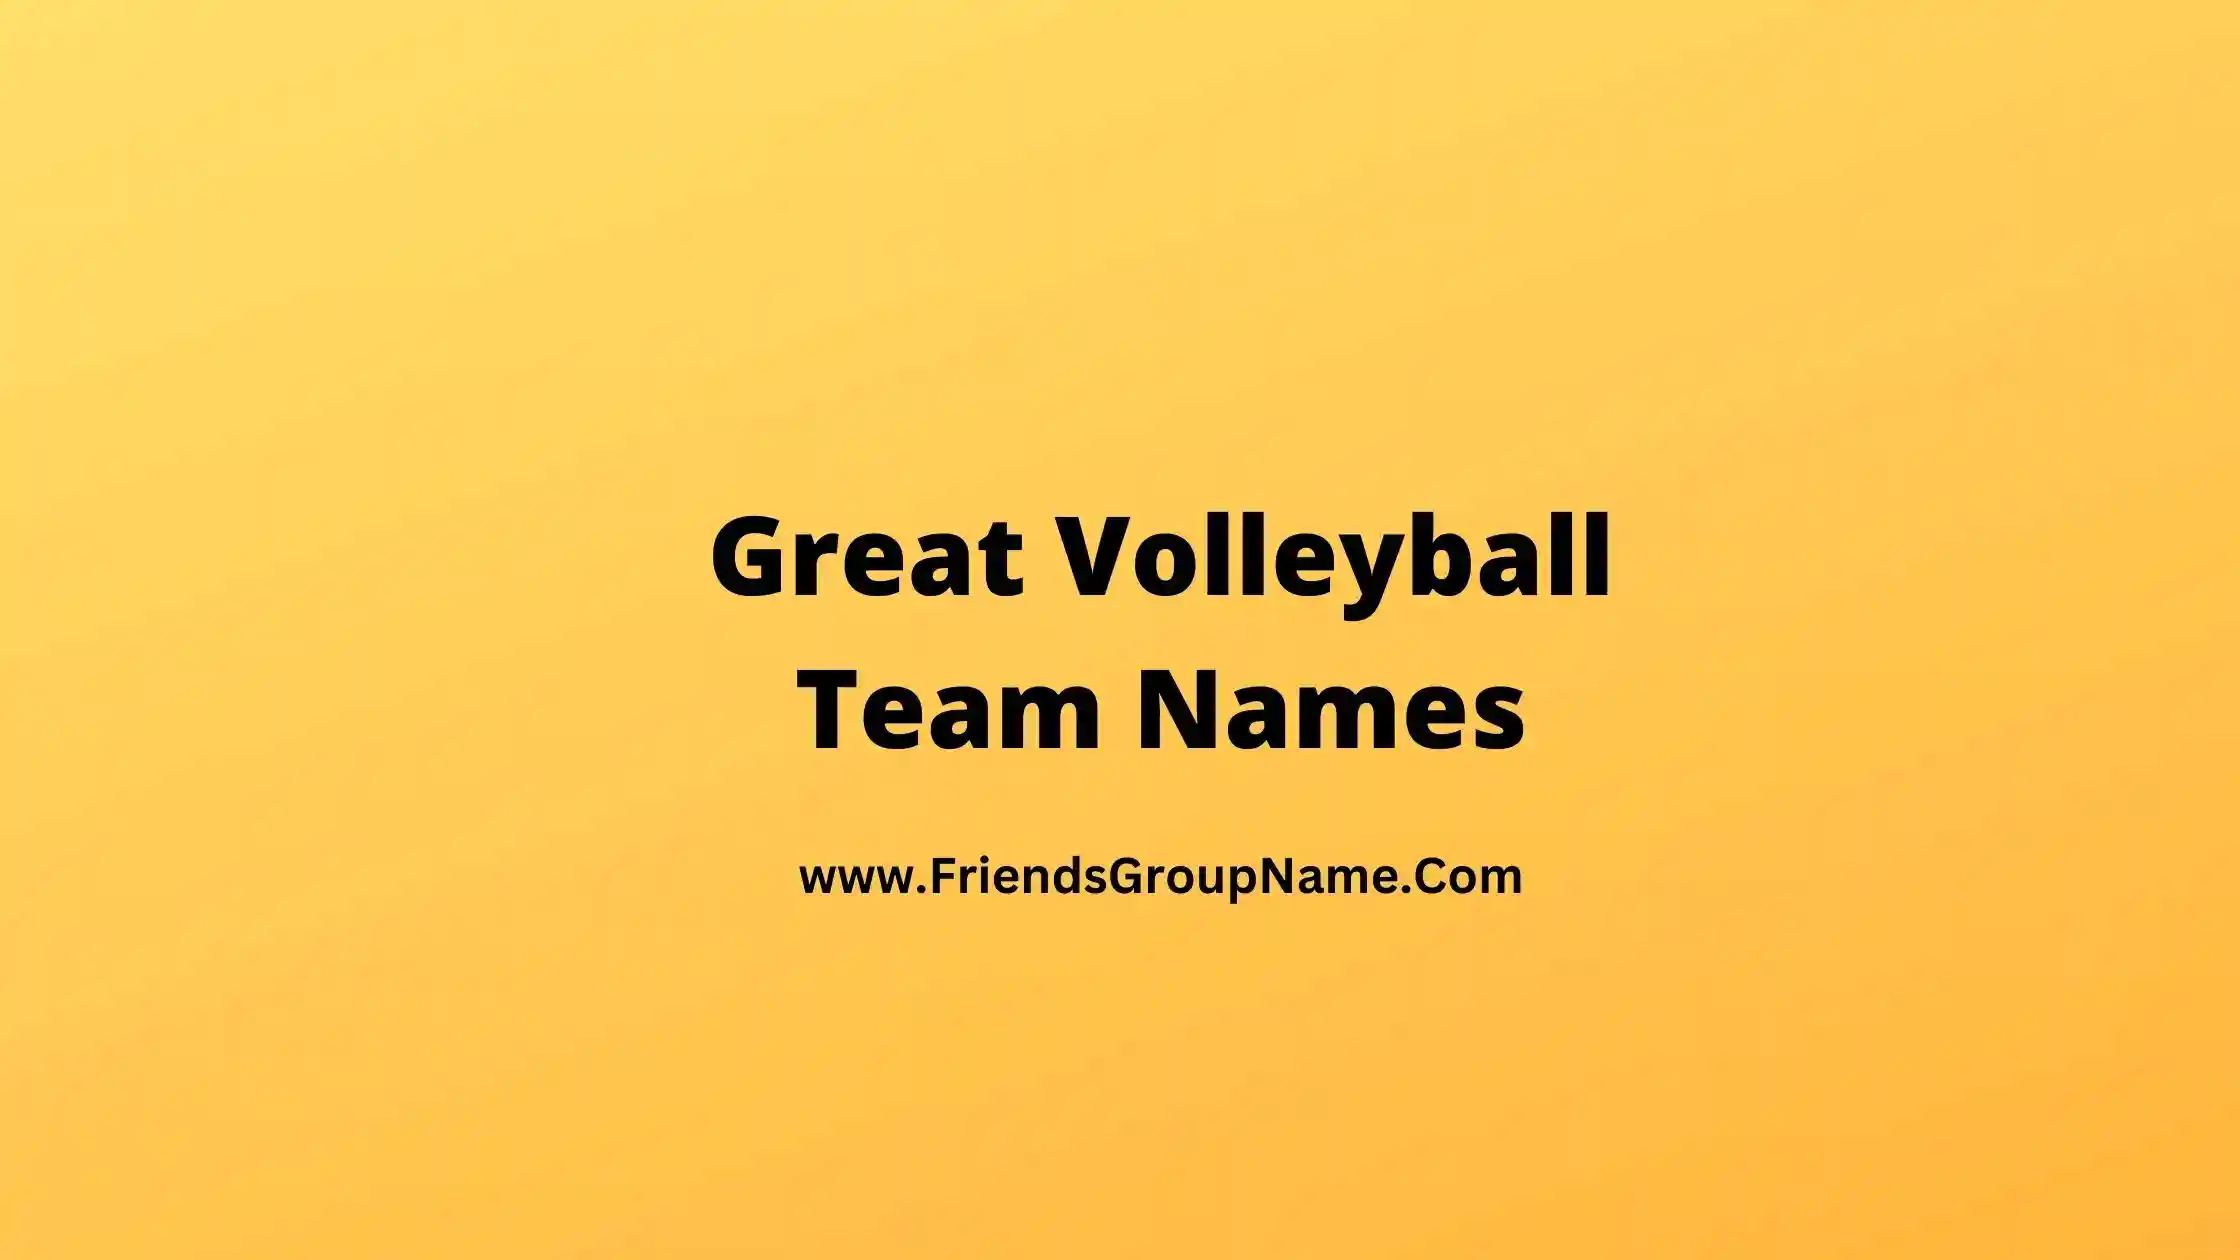 Great Volleyball Team Names